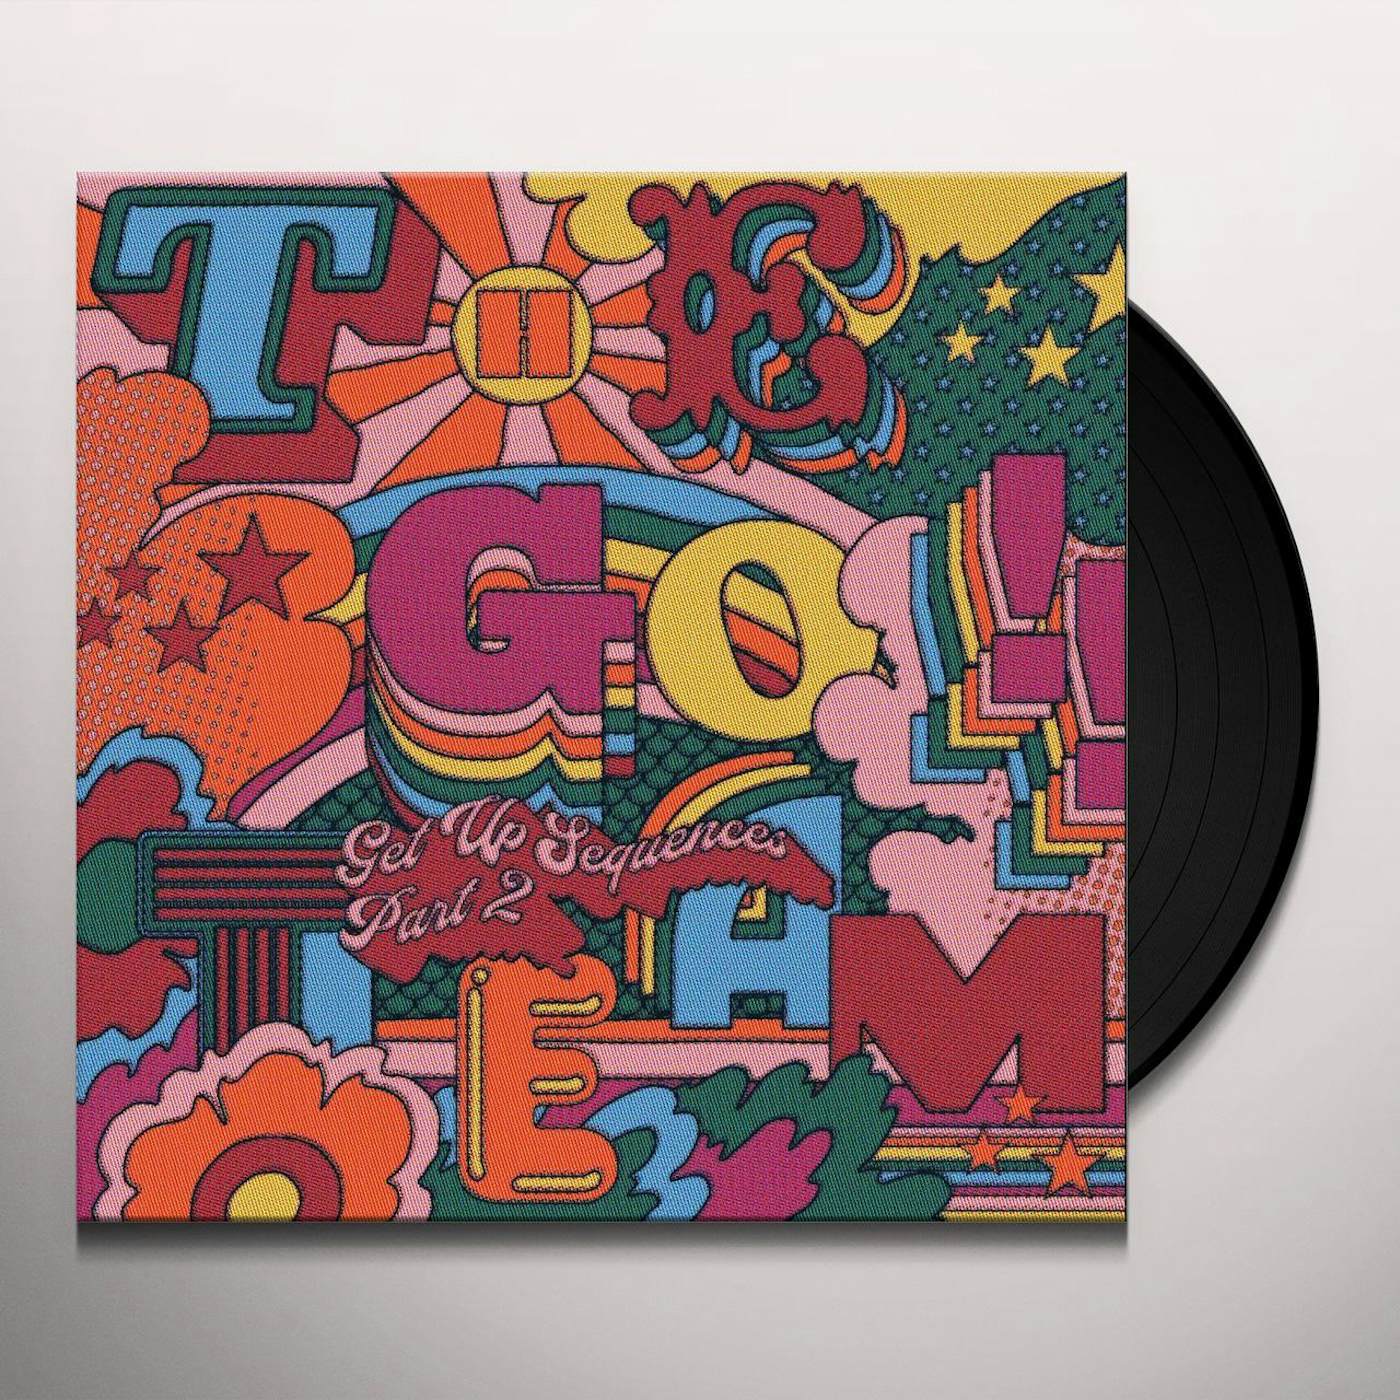 Go Team Go GET UP SEQUENCES PART TWO Vinyl Record